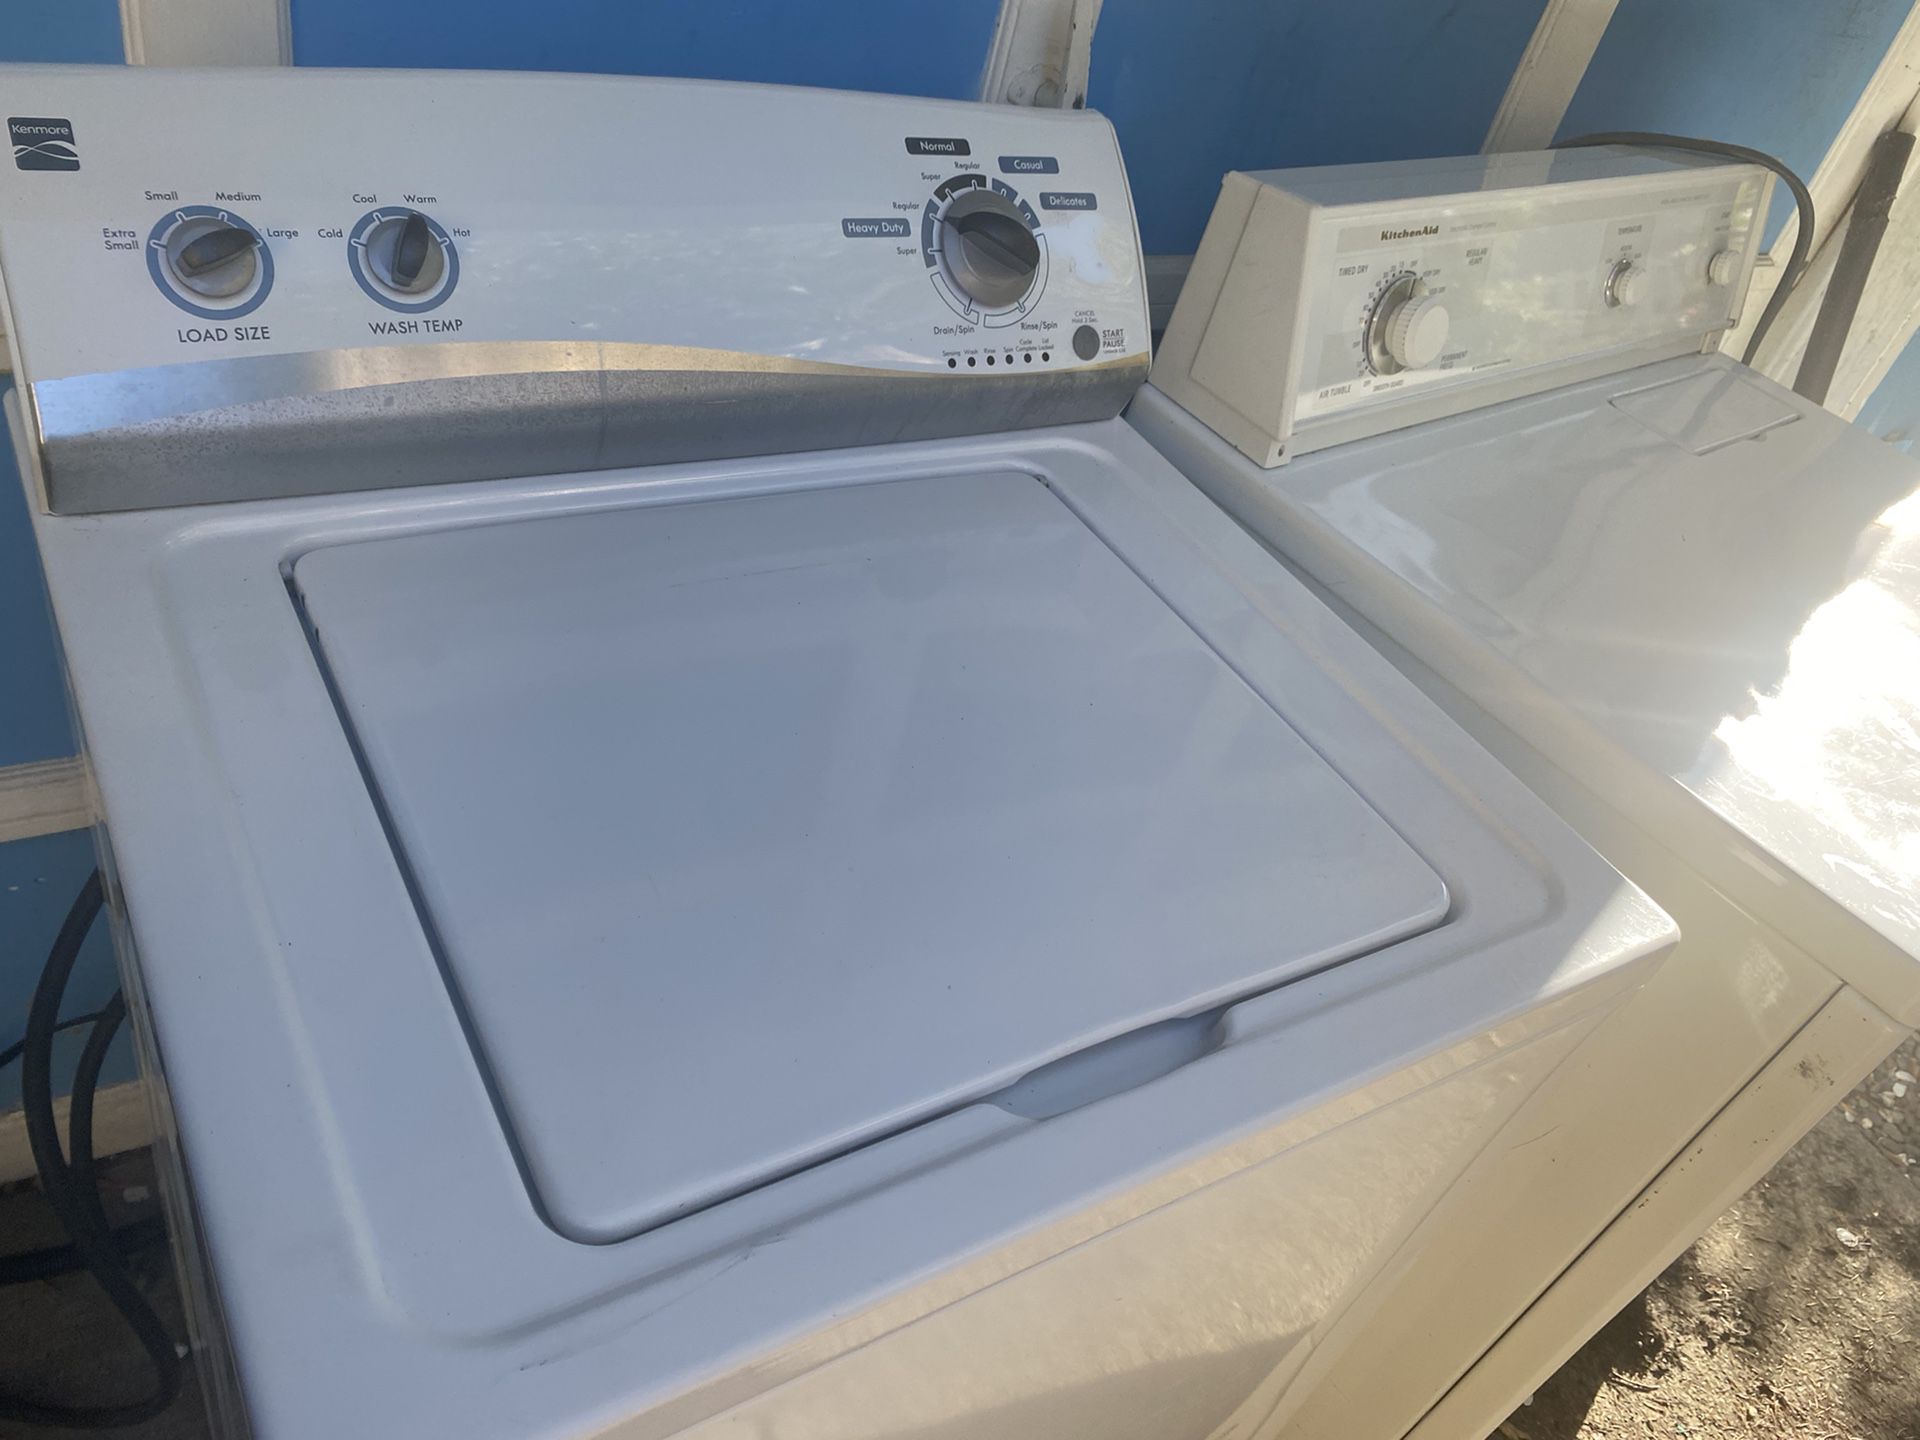 Washer and  Dryer 